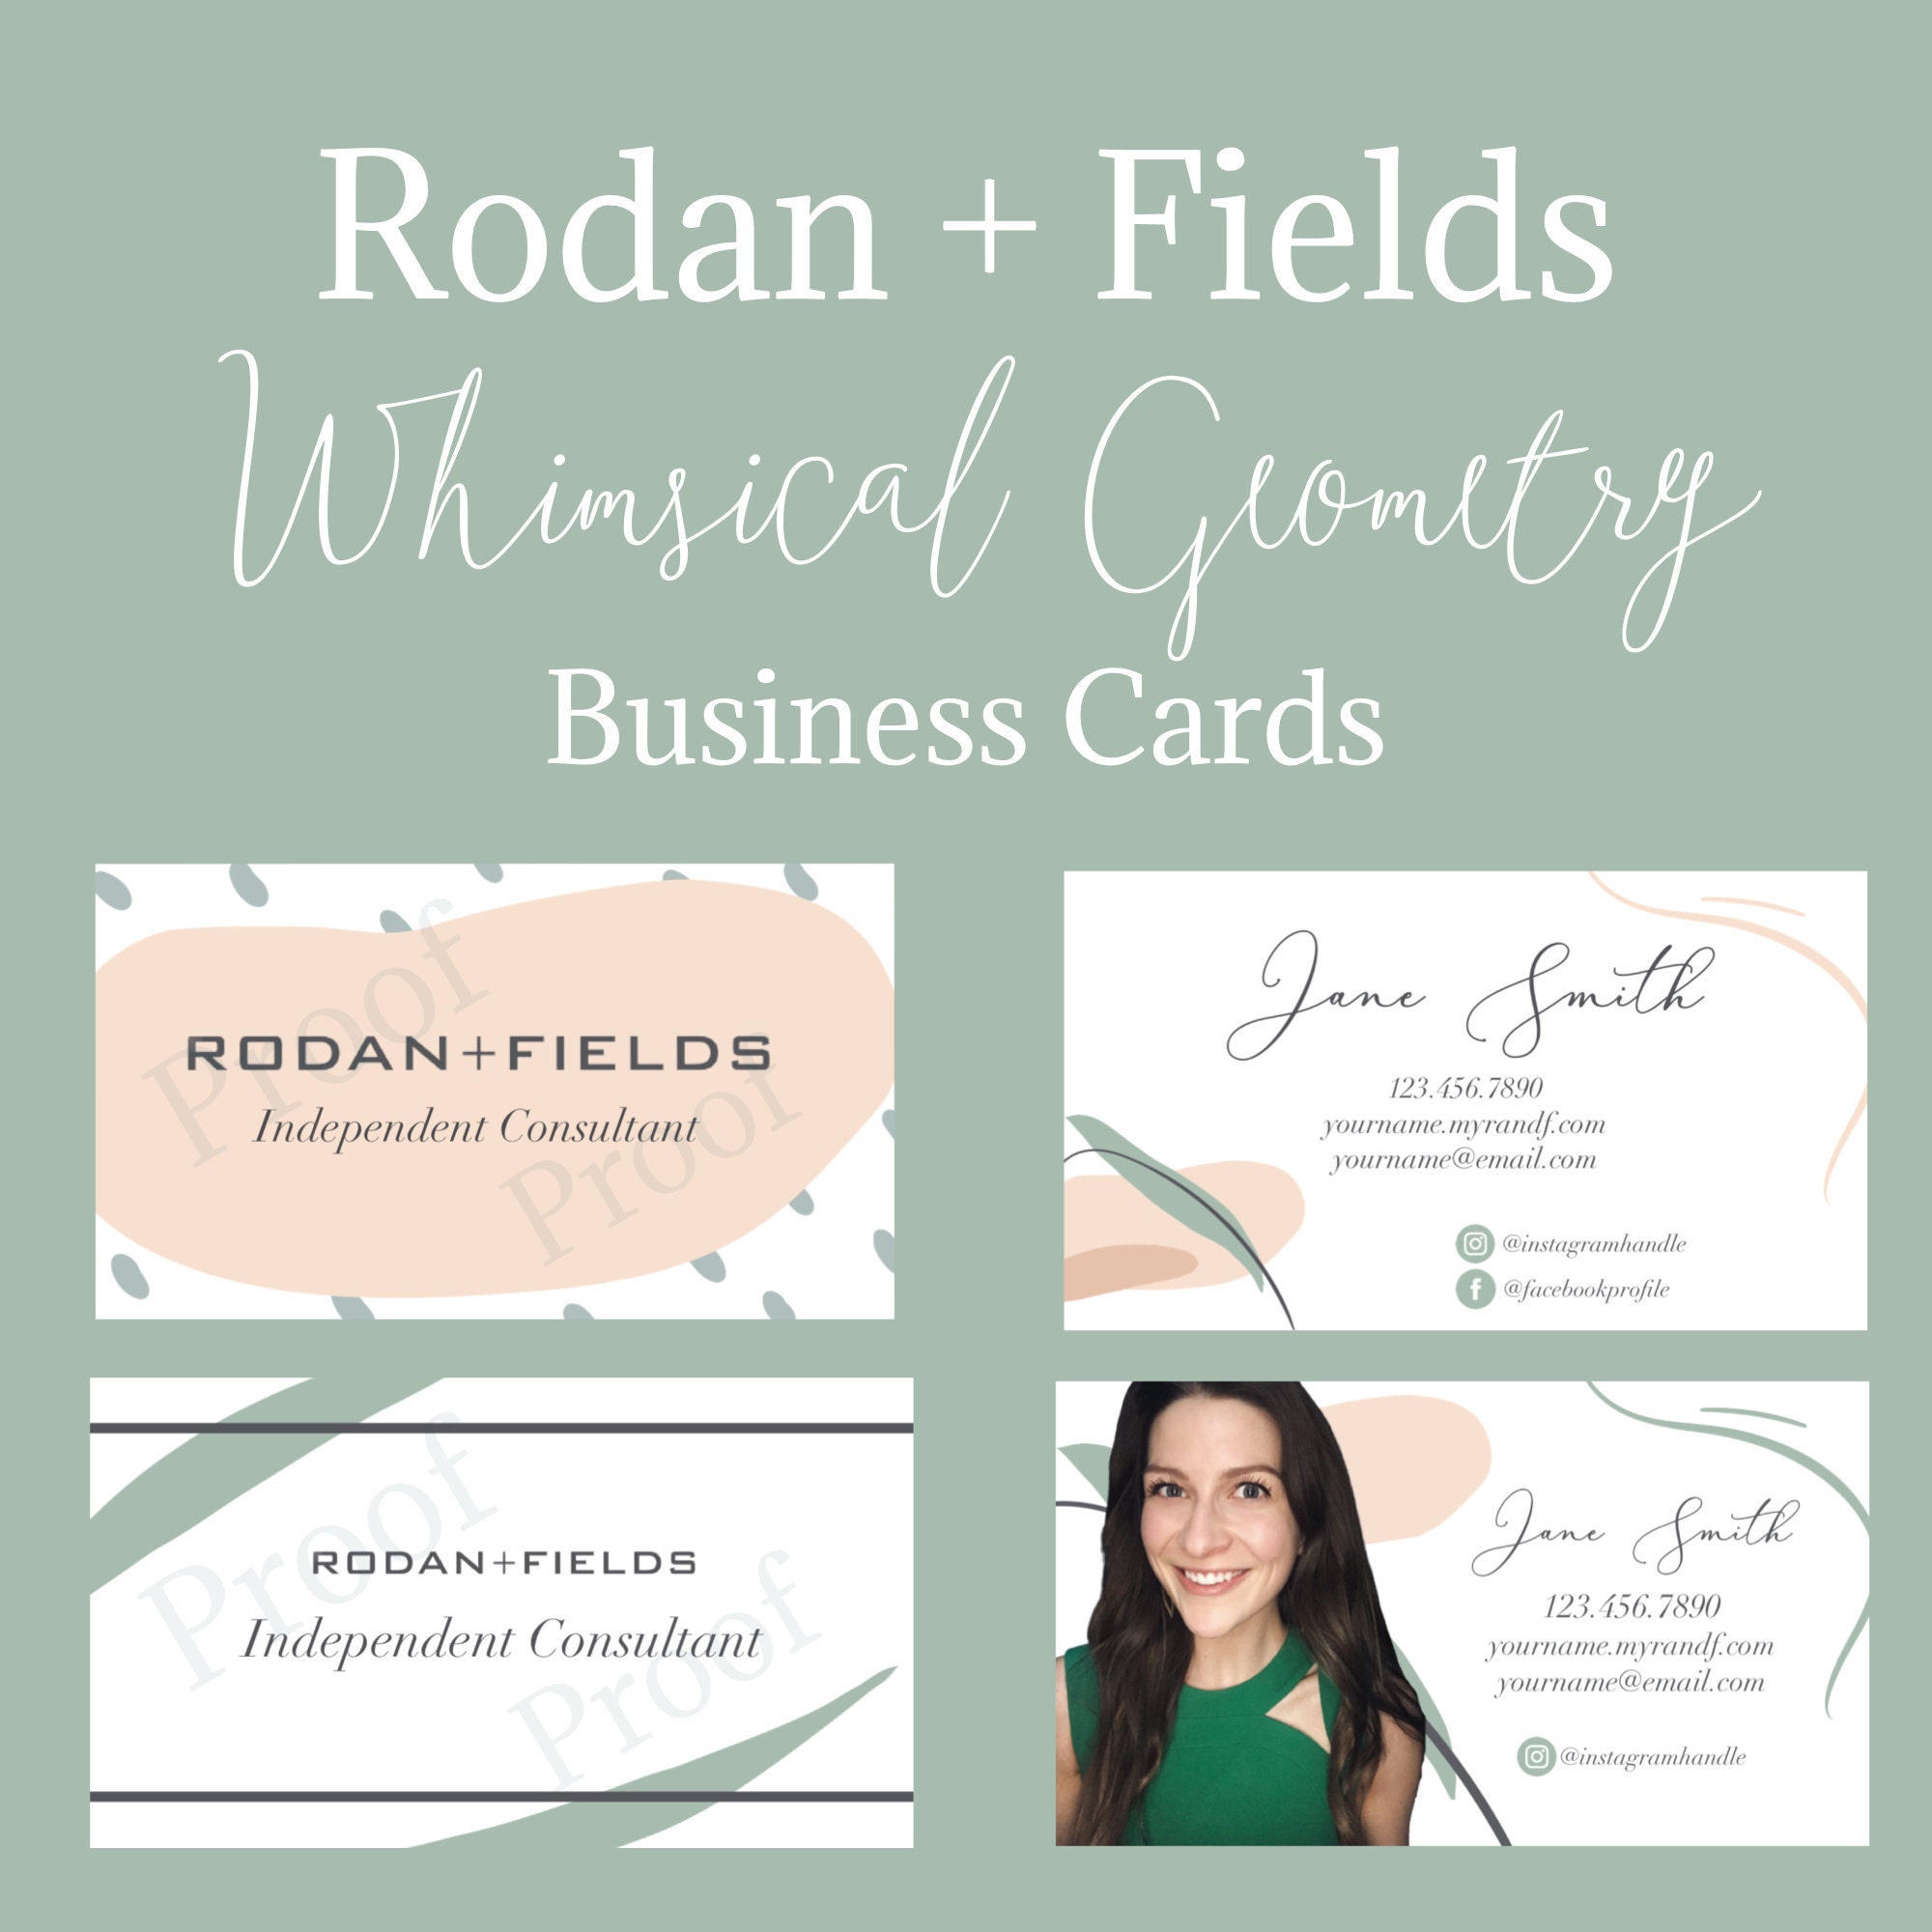 Rodan and Fields Business Cards - Whimsical Geometry Design - Throughout Rodan And Fields Business Card Template